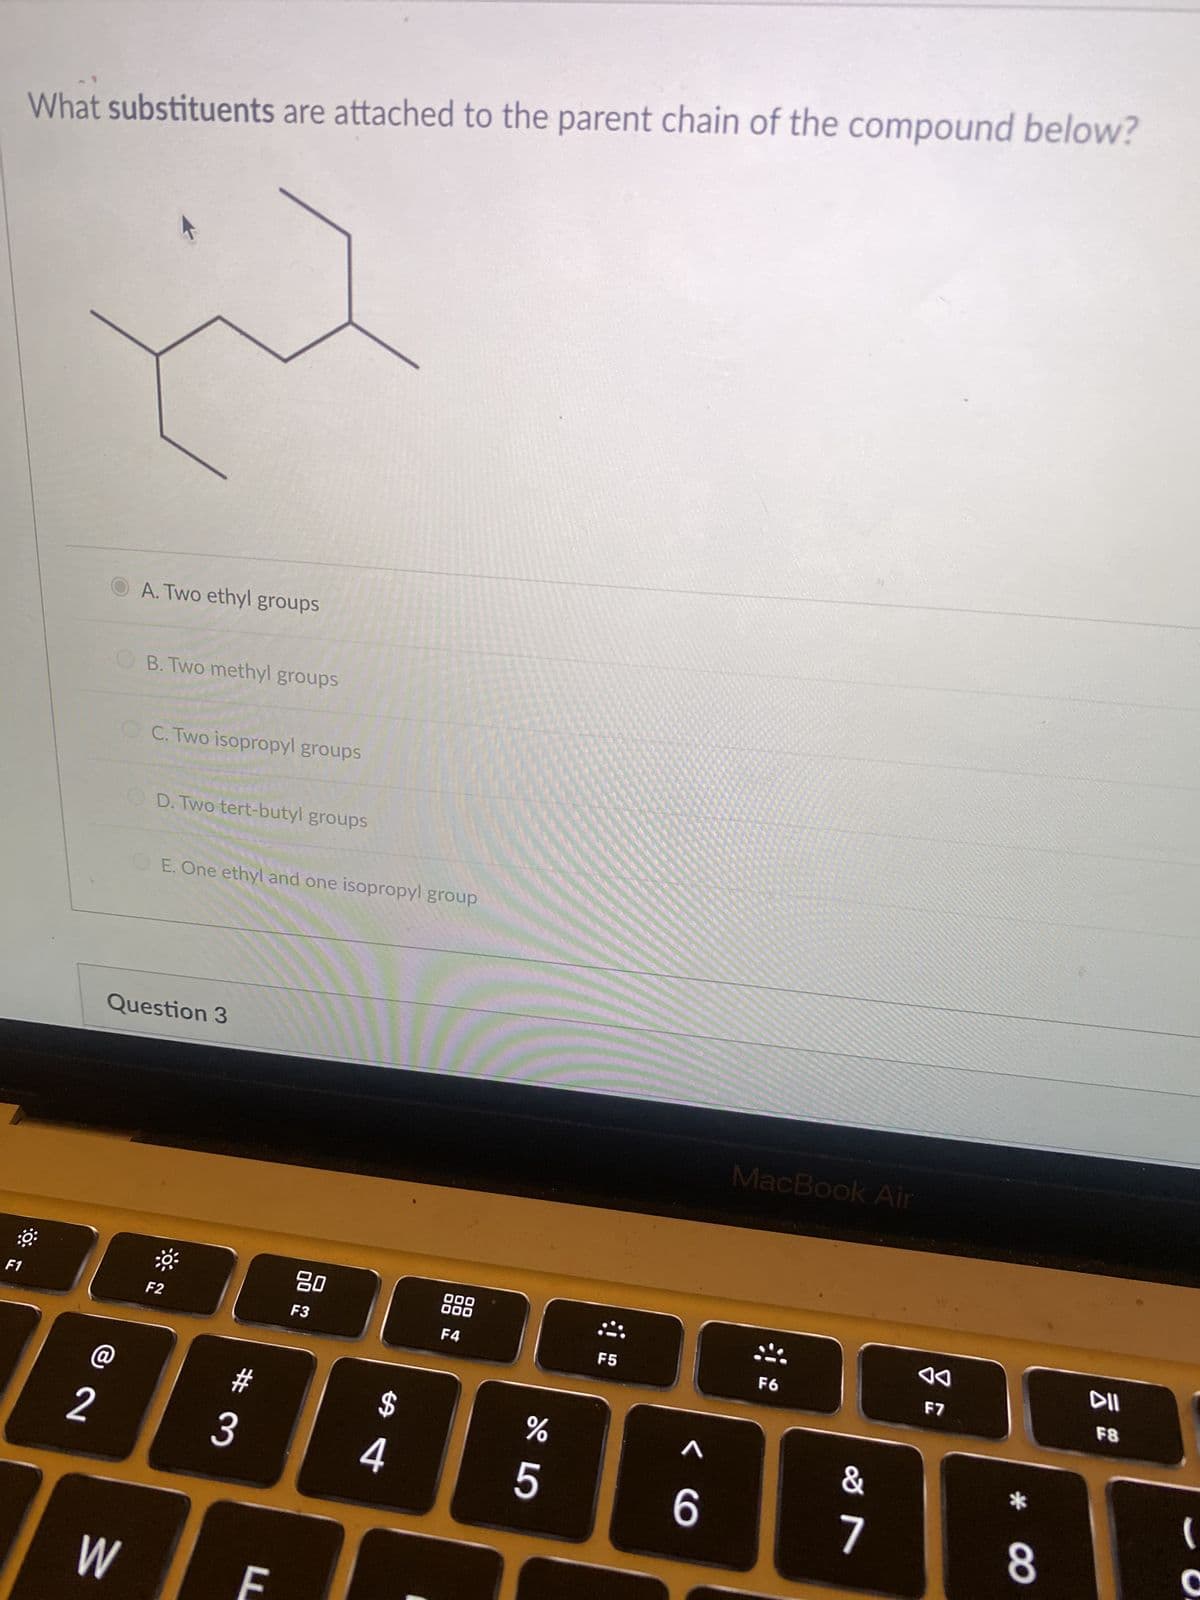 F1
What substituents are attached to the parent chain of the compound below?
@
2
A. Two ethyl groups
B. Two methyl groups
W
C. Two isopropyl groups
D. Two tert-butyl groups
Question 3
E. One ethyl and one isopropyl group
F2
3
80
F3
F
$
000
000
F4
F5
^
MacBook Air
F6
&
%
AB88841
5
6
8
7
F7
F8
(
C